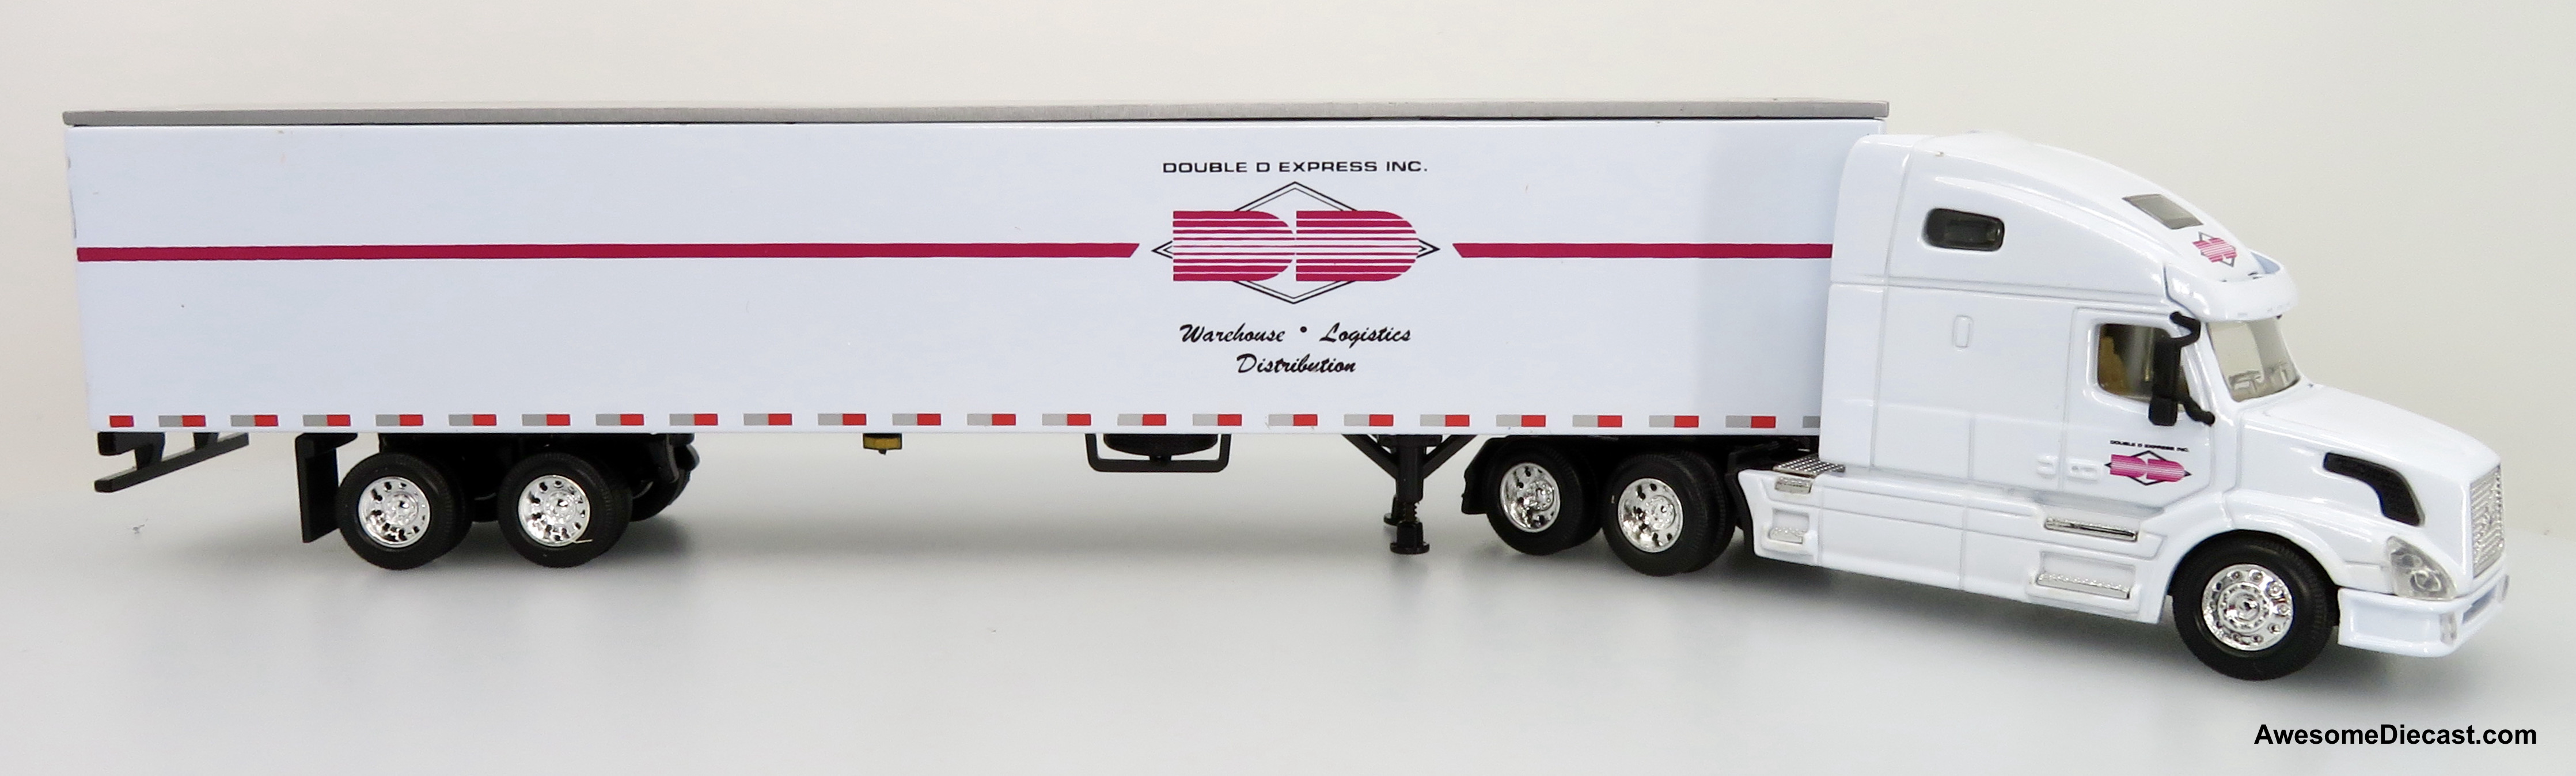 Only One! DG Productions 1:64 Volvo VNL Sleeper Cab w/ 53' Trailer: Double D Express